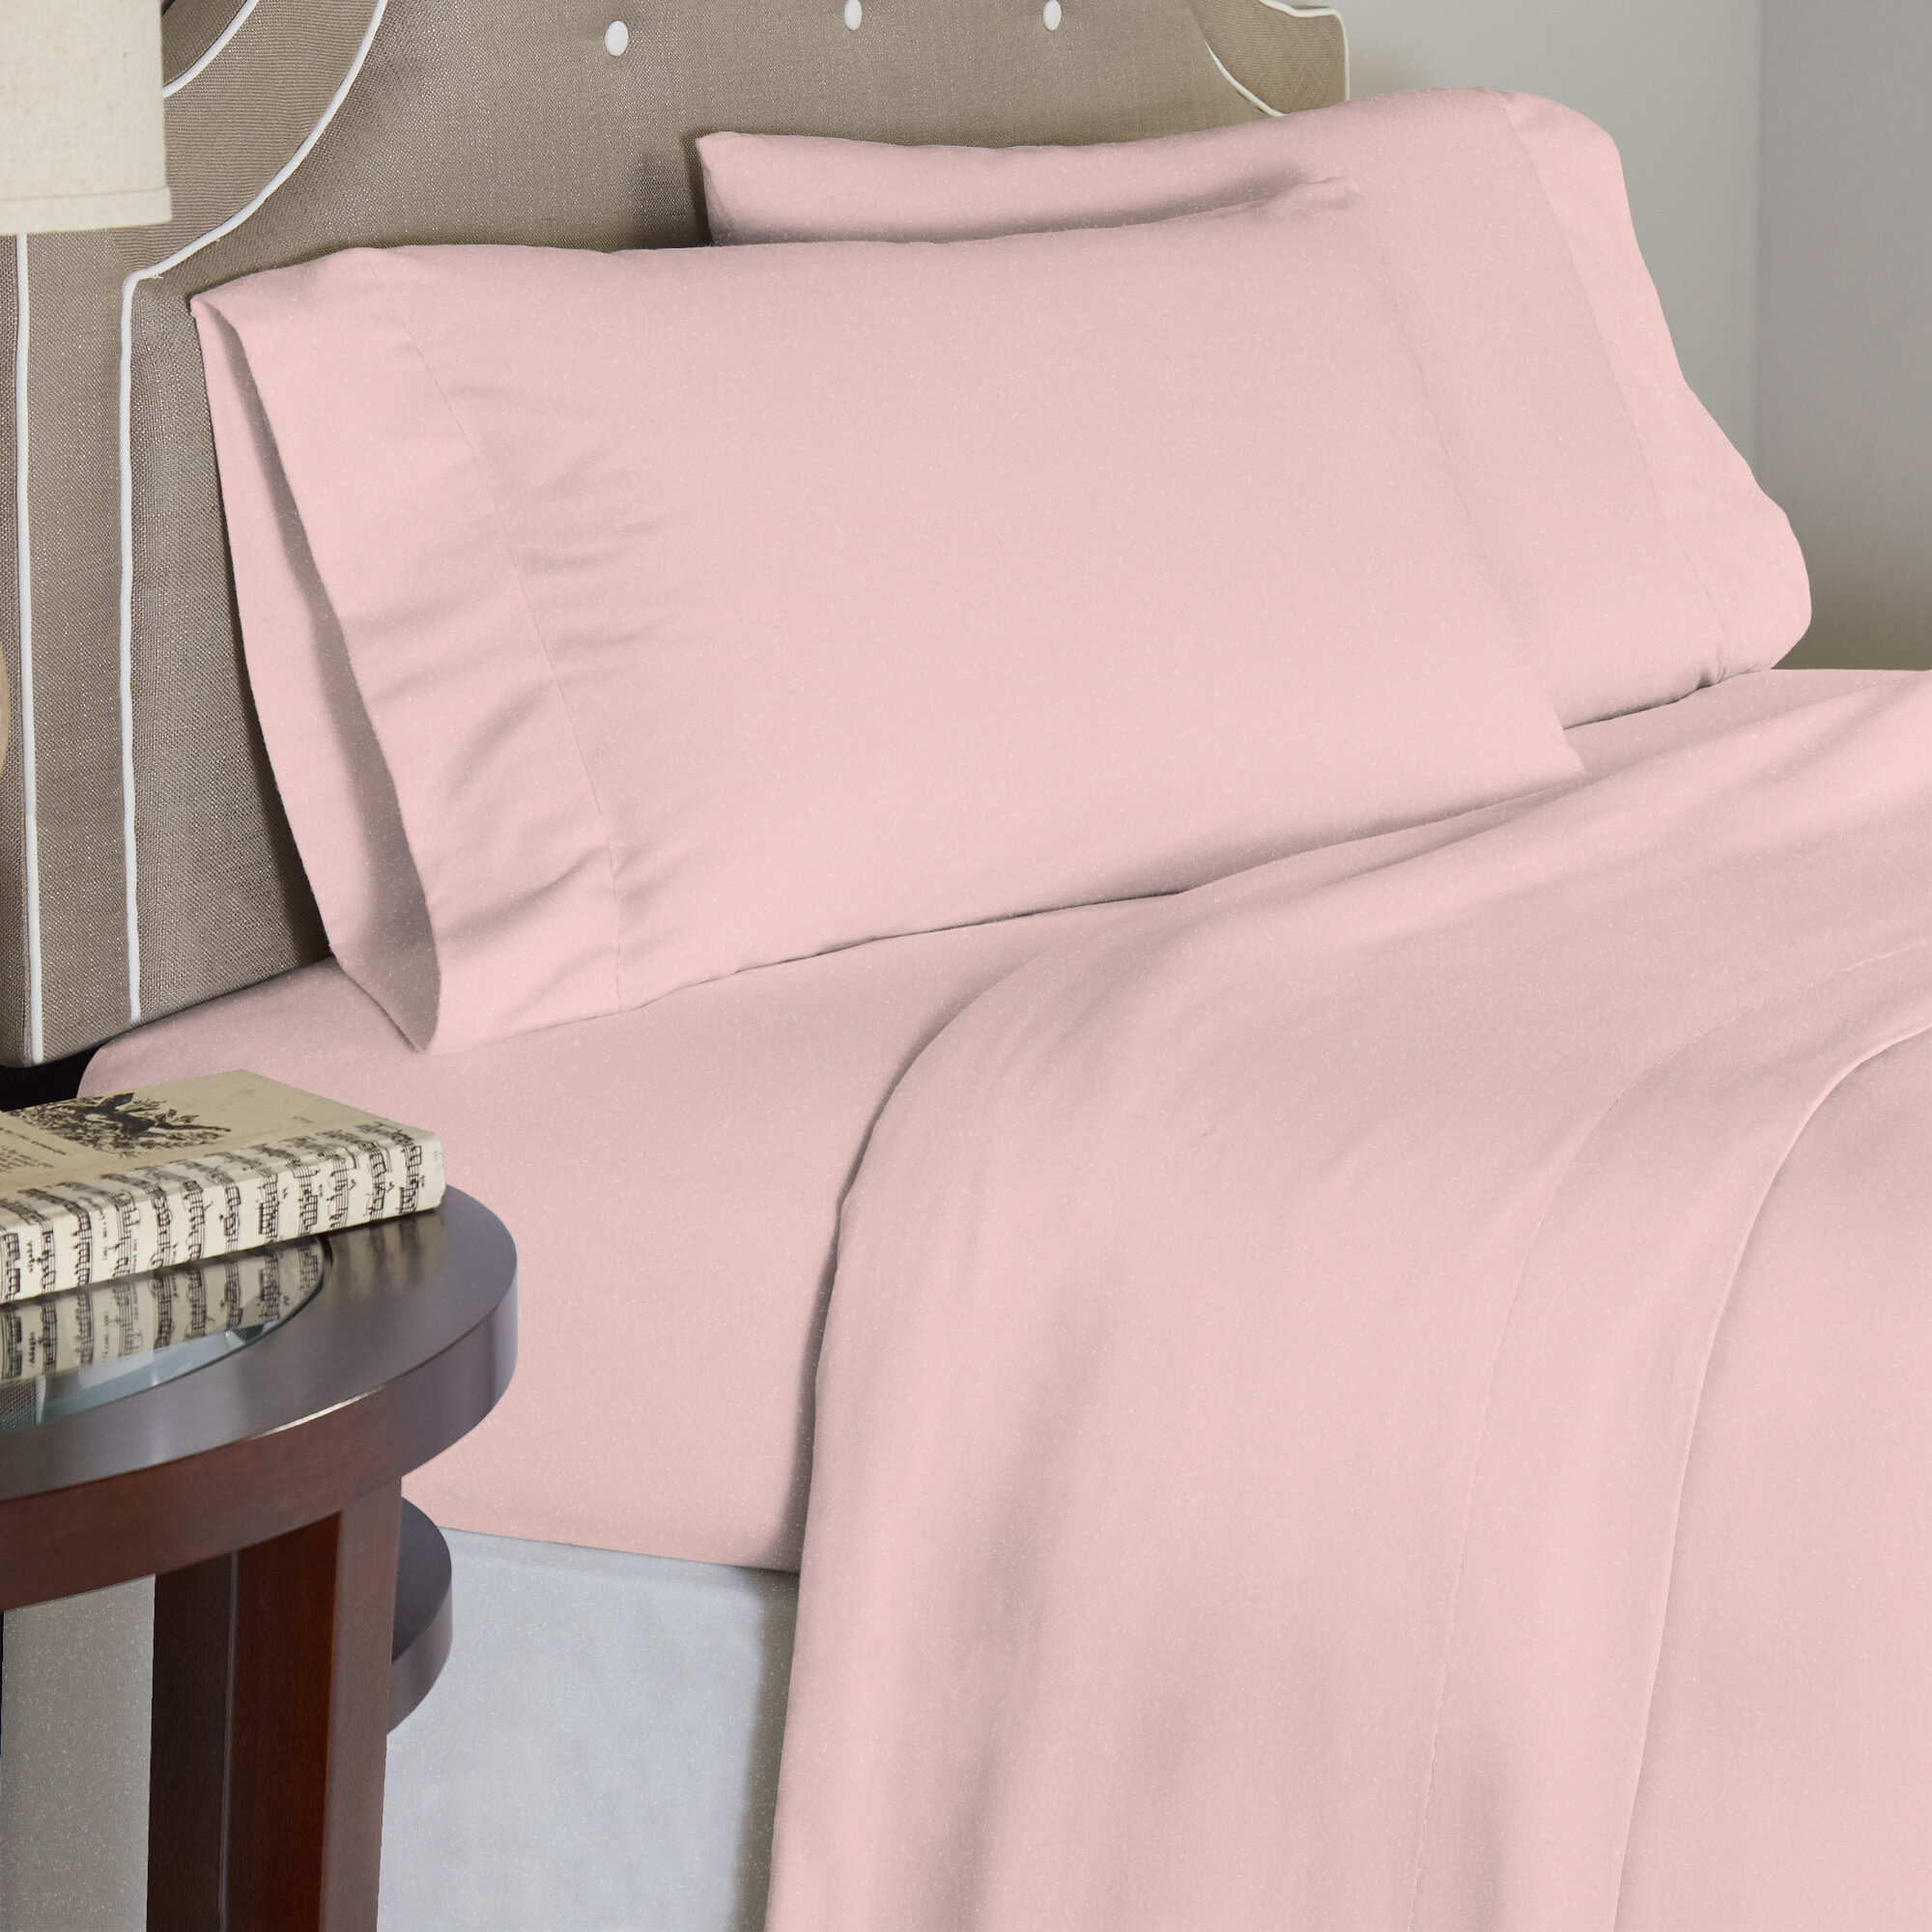 Pink Plain Dyed 50%Polyester 50%Cotton Flat Bed Sheets+Free Pair Of Pillow Cases